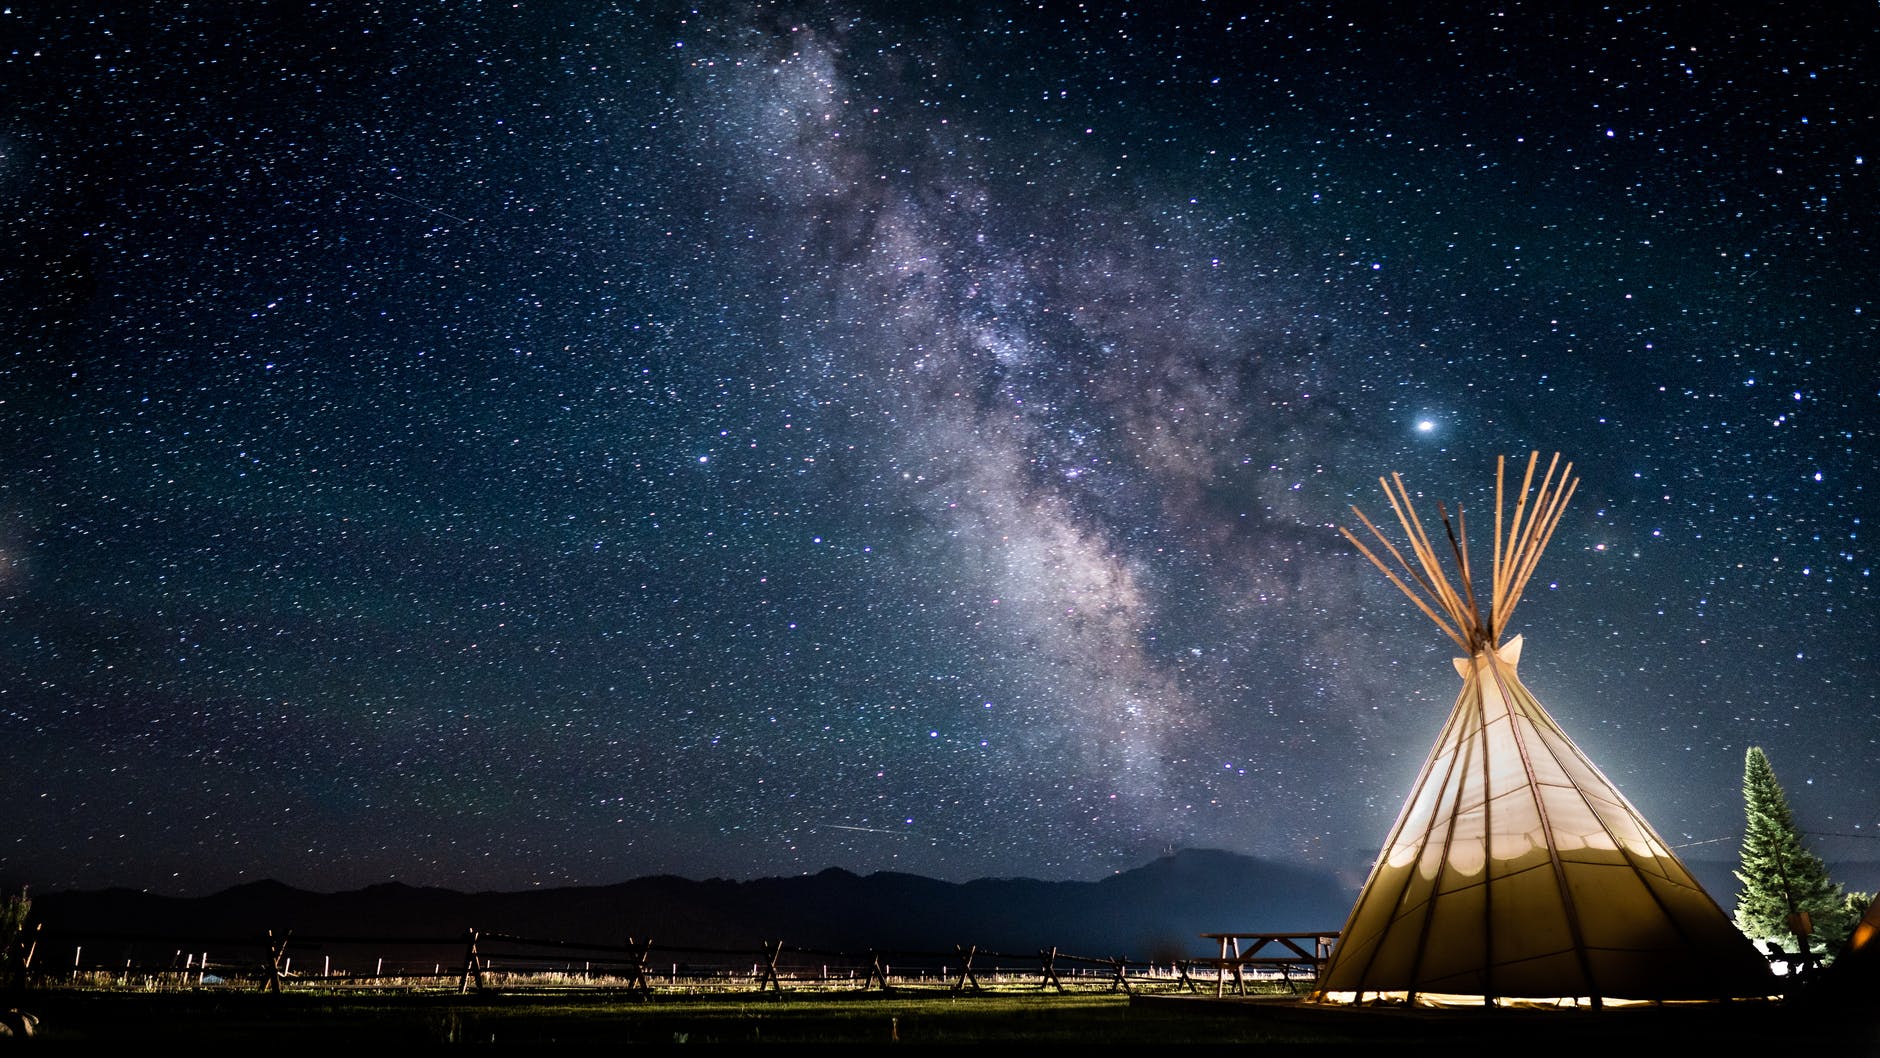 photo of teepee under a starry sky